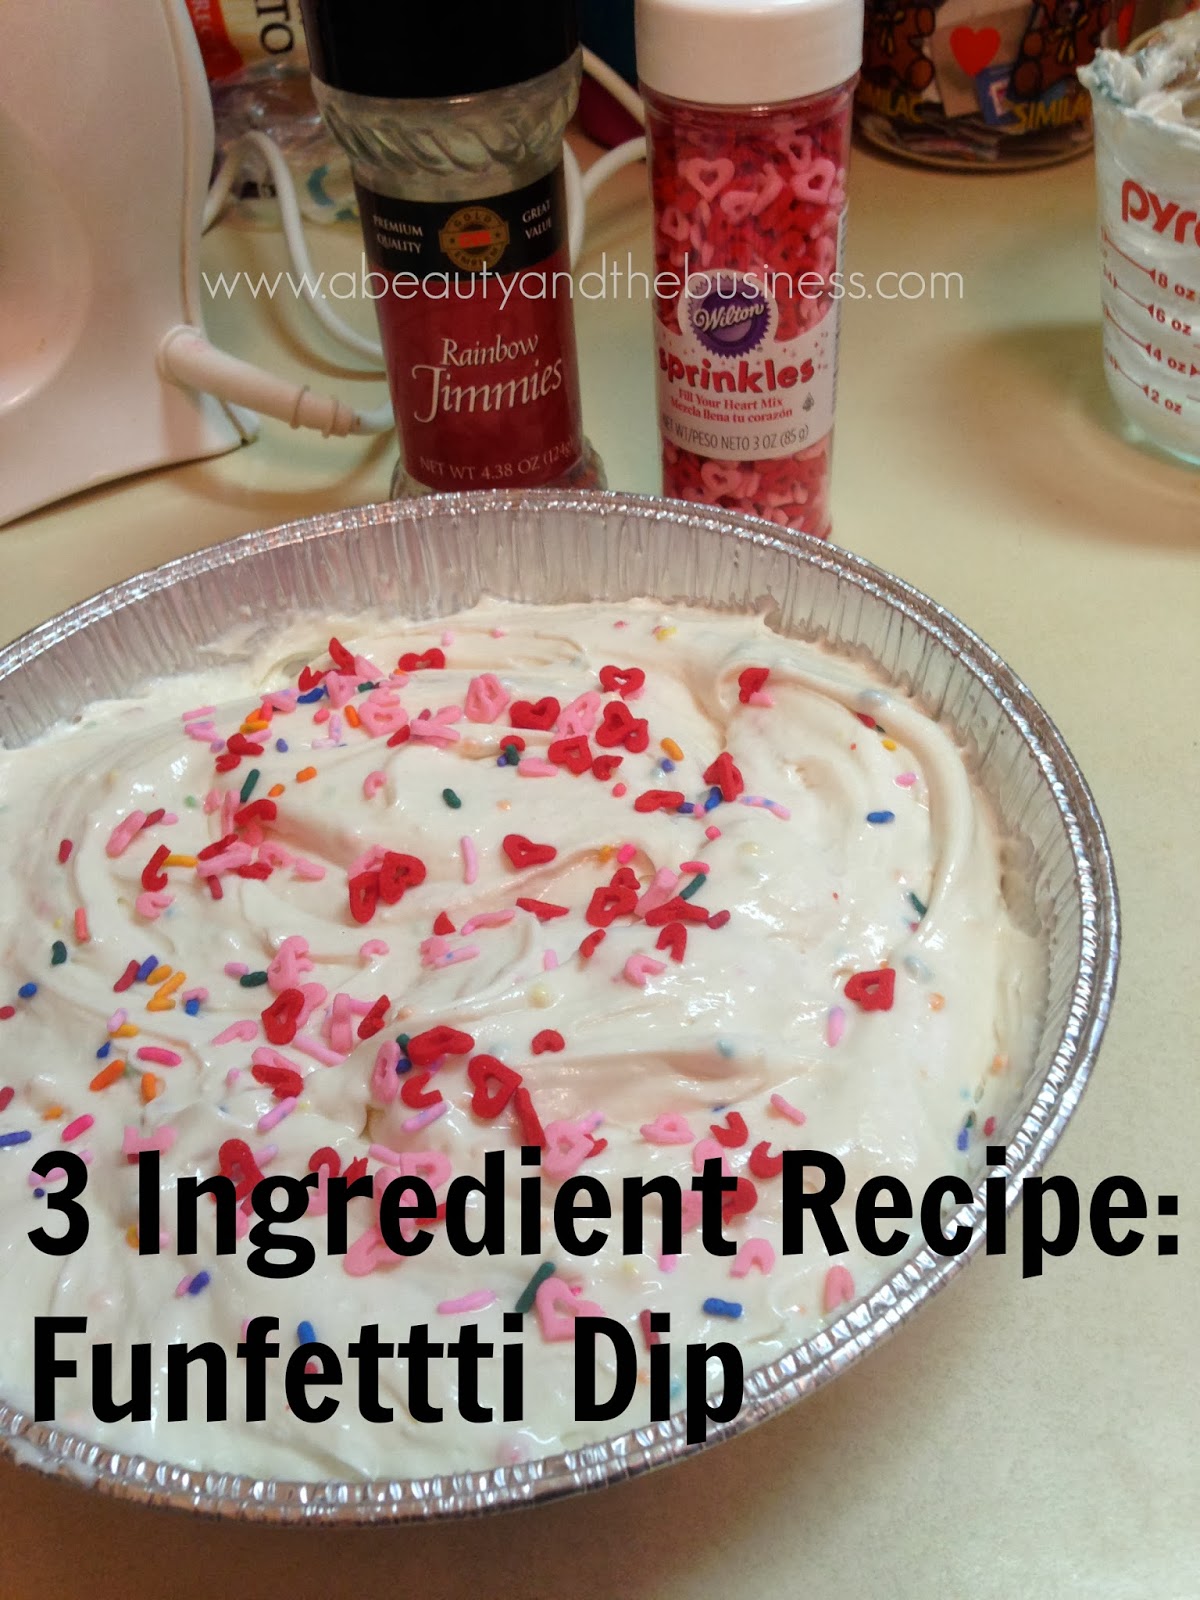 3 Ingredient Recipe: Skinny Funfetti Dip | A Beauty and The Business1200 x 1600